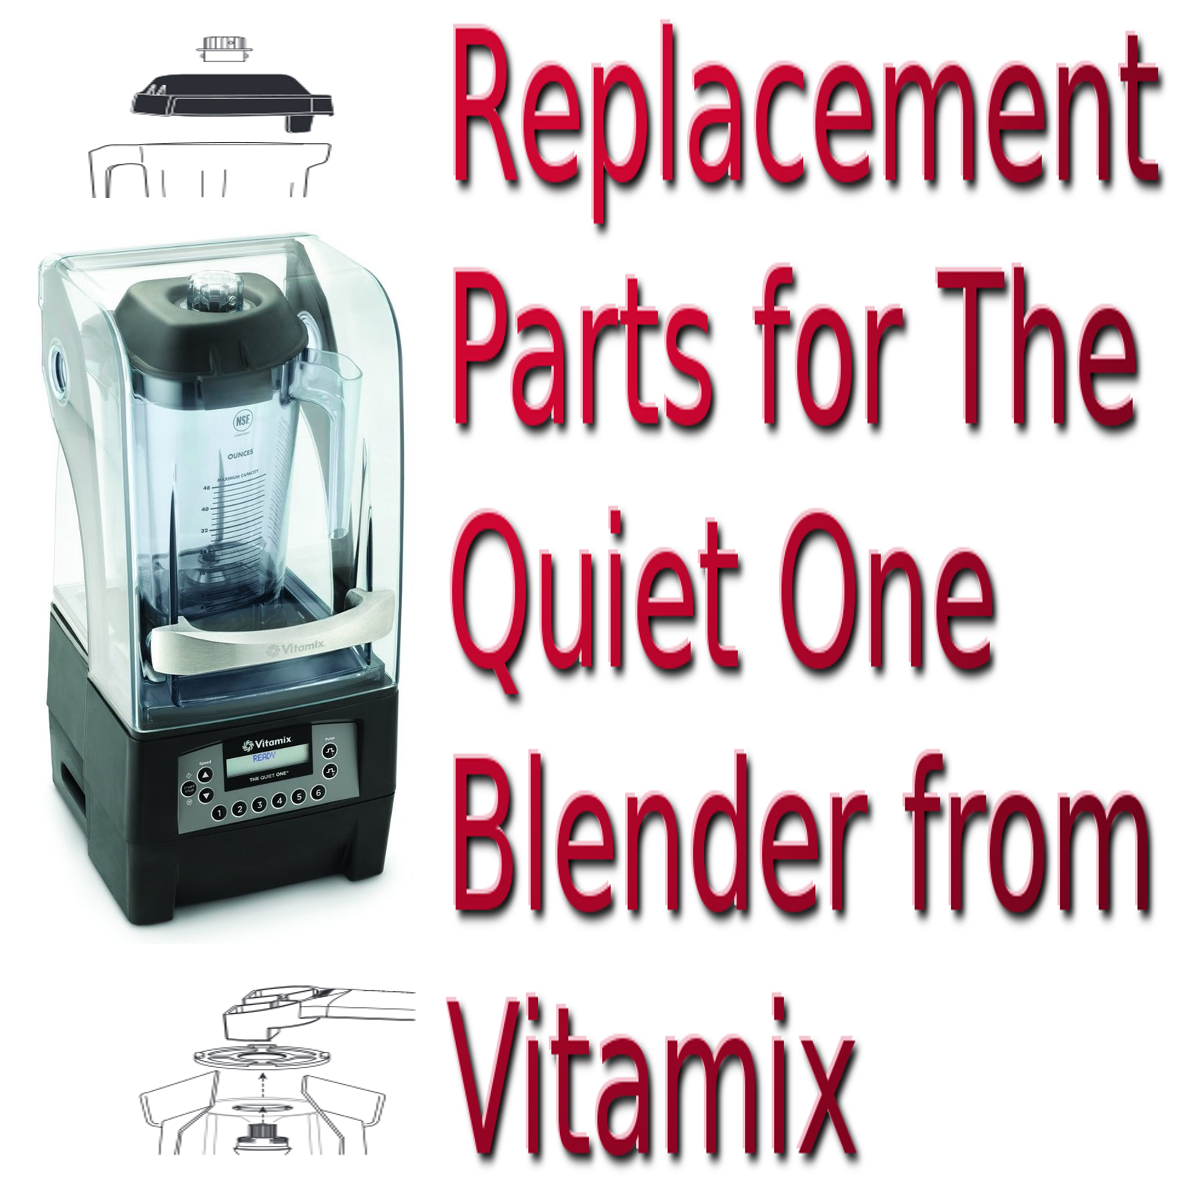 Replacement Parts for The Quiet One Blender from Vitamix